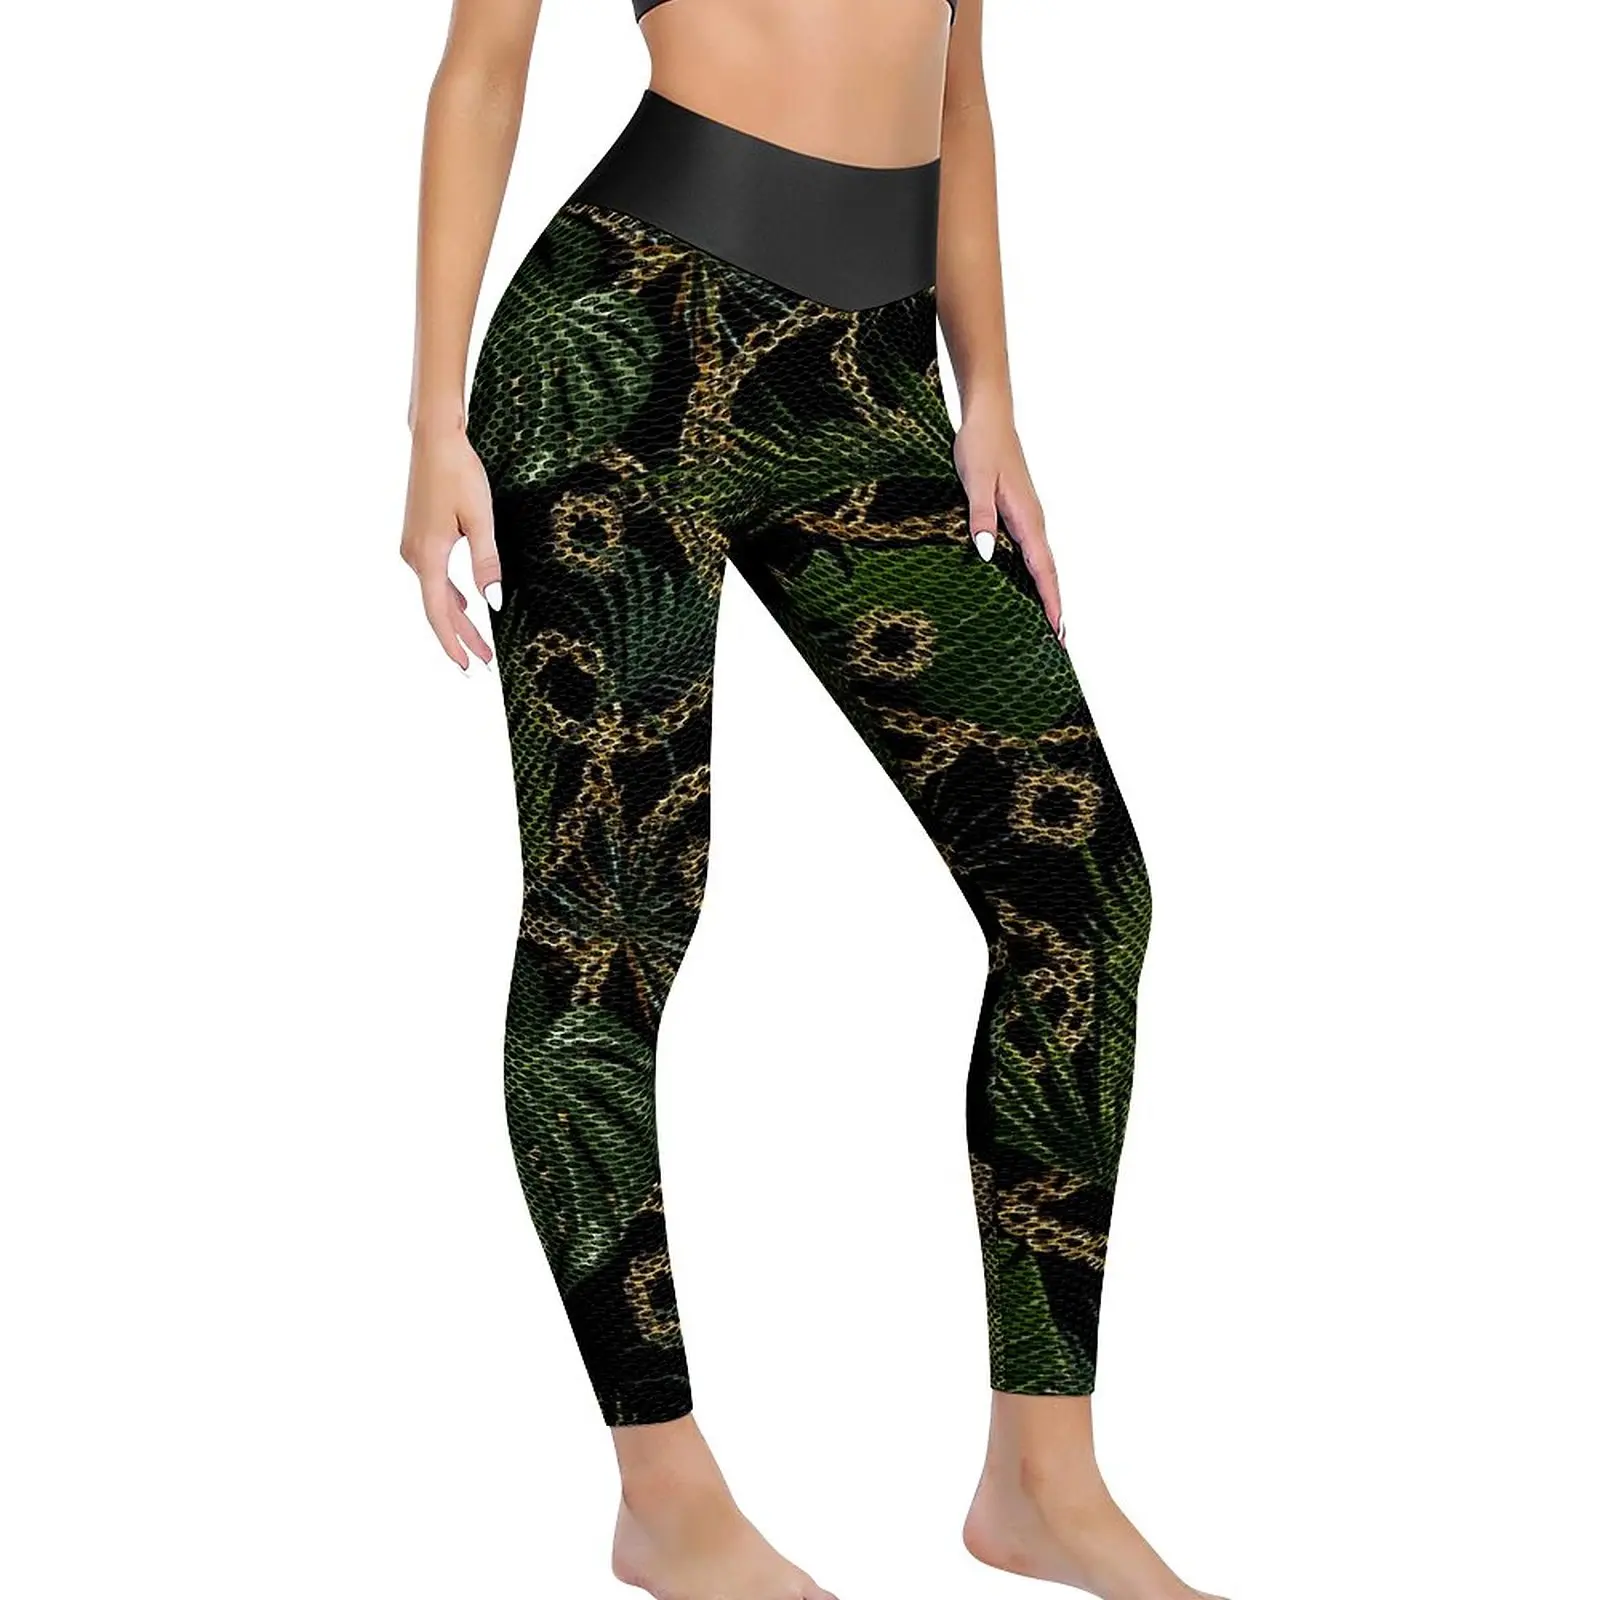 Baroque Print Yoga Pants Sexy Tropical Palm Leaves Pattern Leggings Push Up Fitness Leggins Lady Aesthetic Stretch Sports Tights